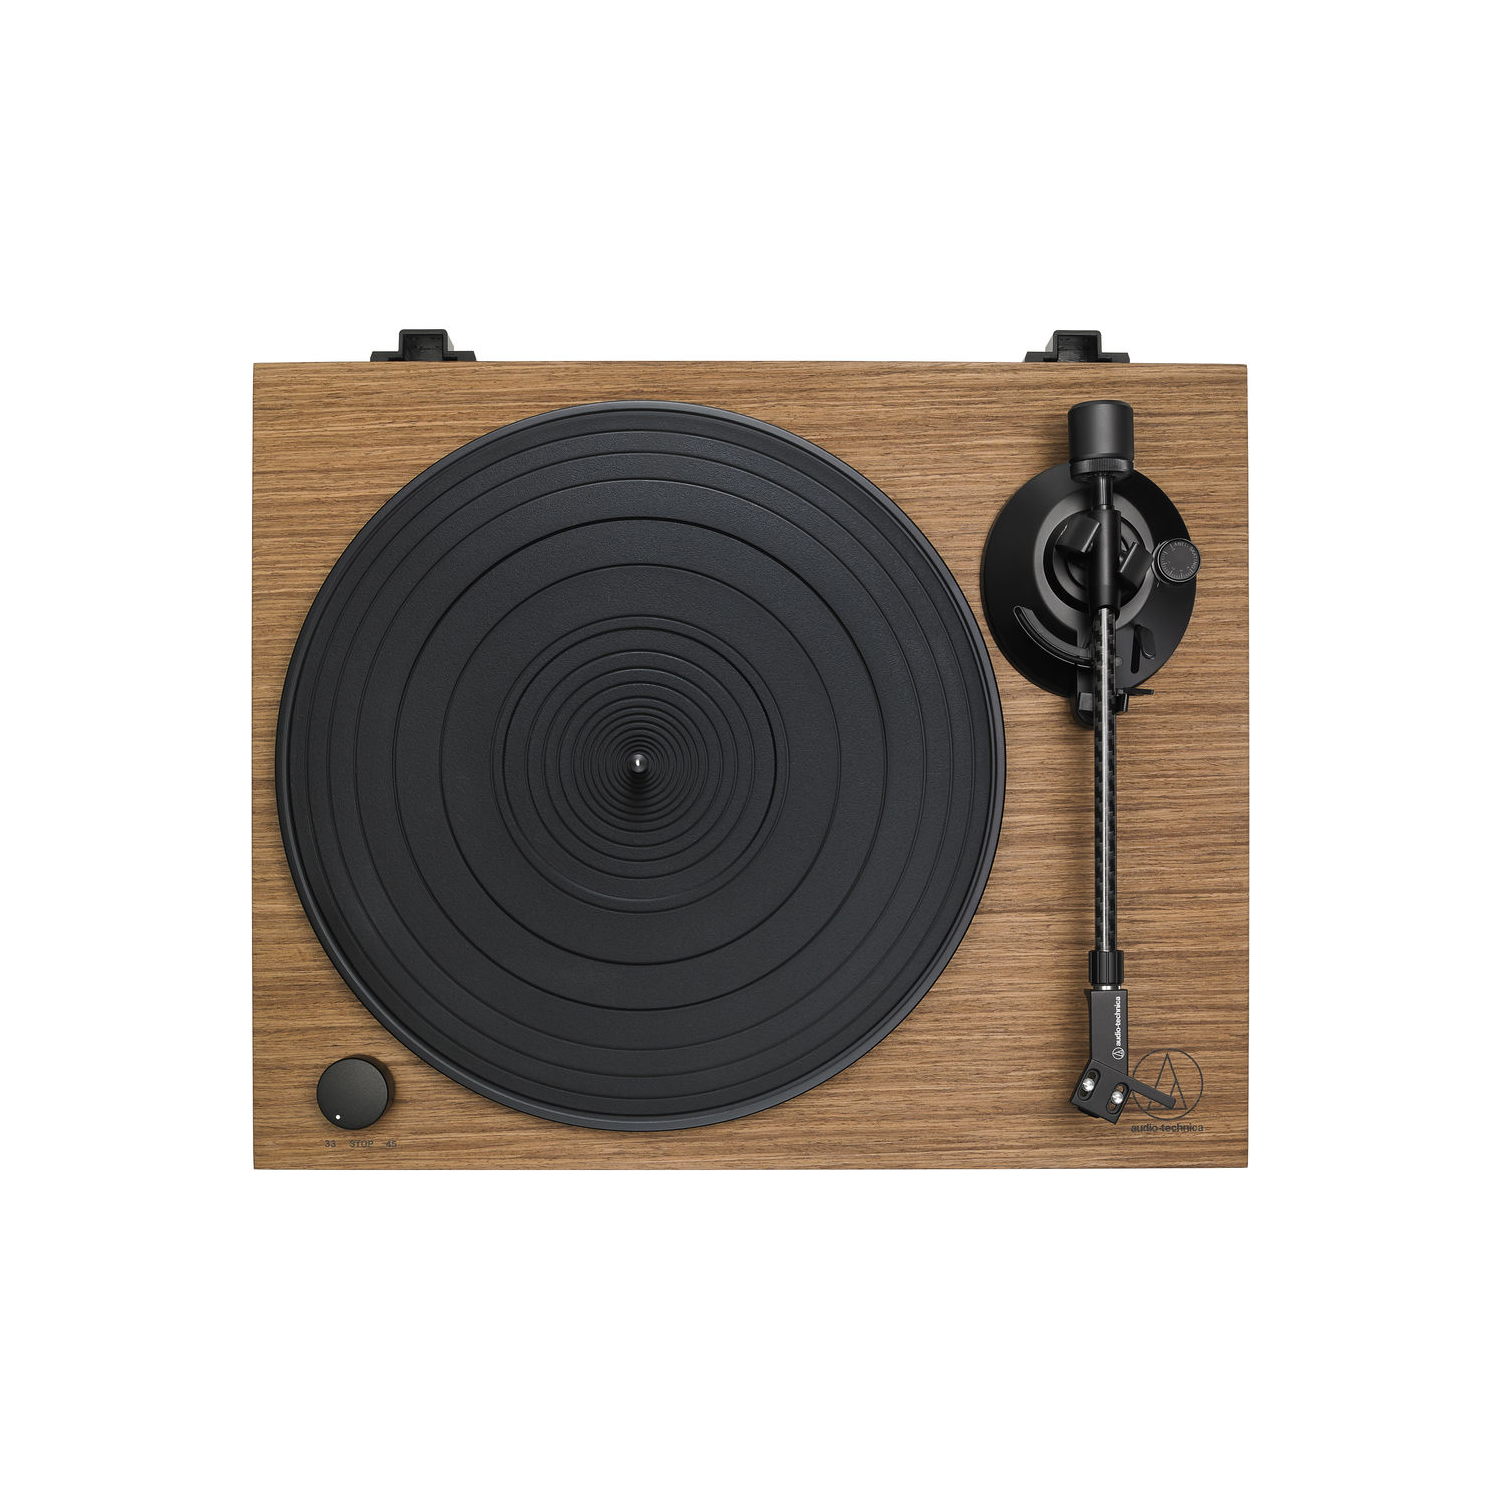 Audio-Technica Consumer AT-LPW40WN Stereo Turntable - Walnut